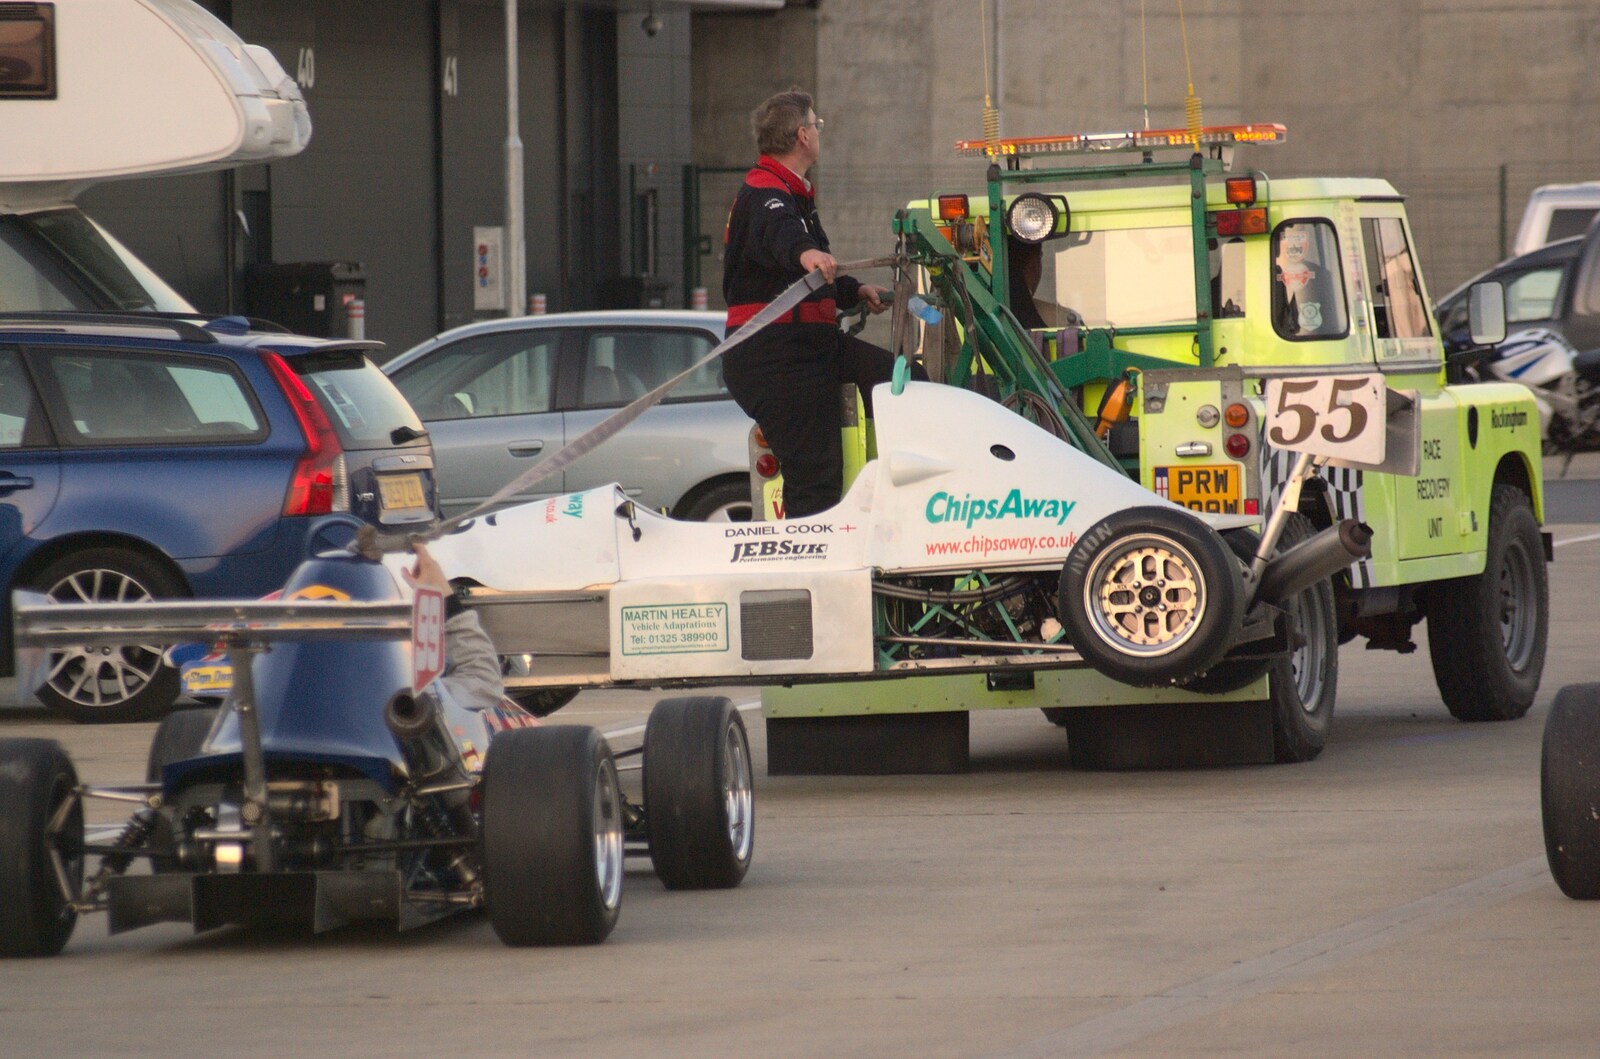 Another car is towed away from TouchType at Silverstone, Northamptonshire - 22nd October 2011